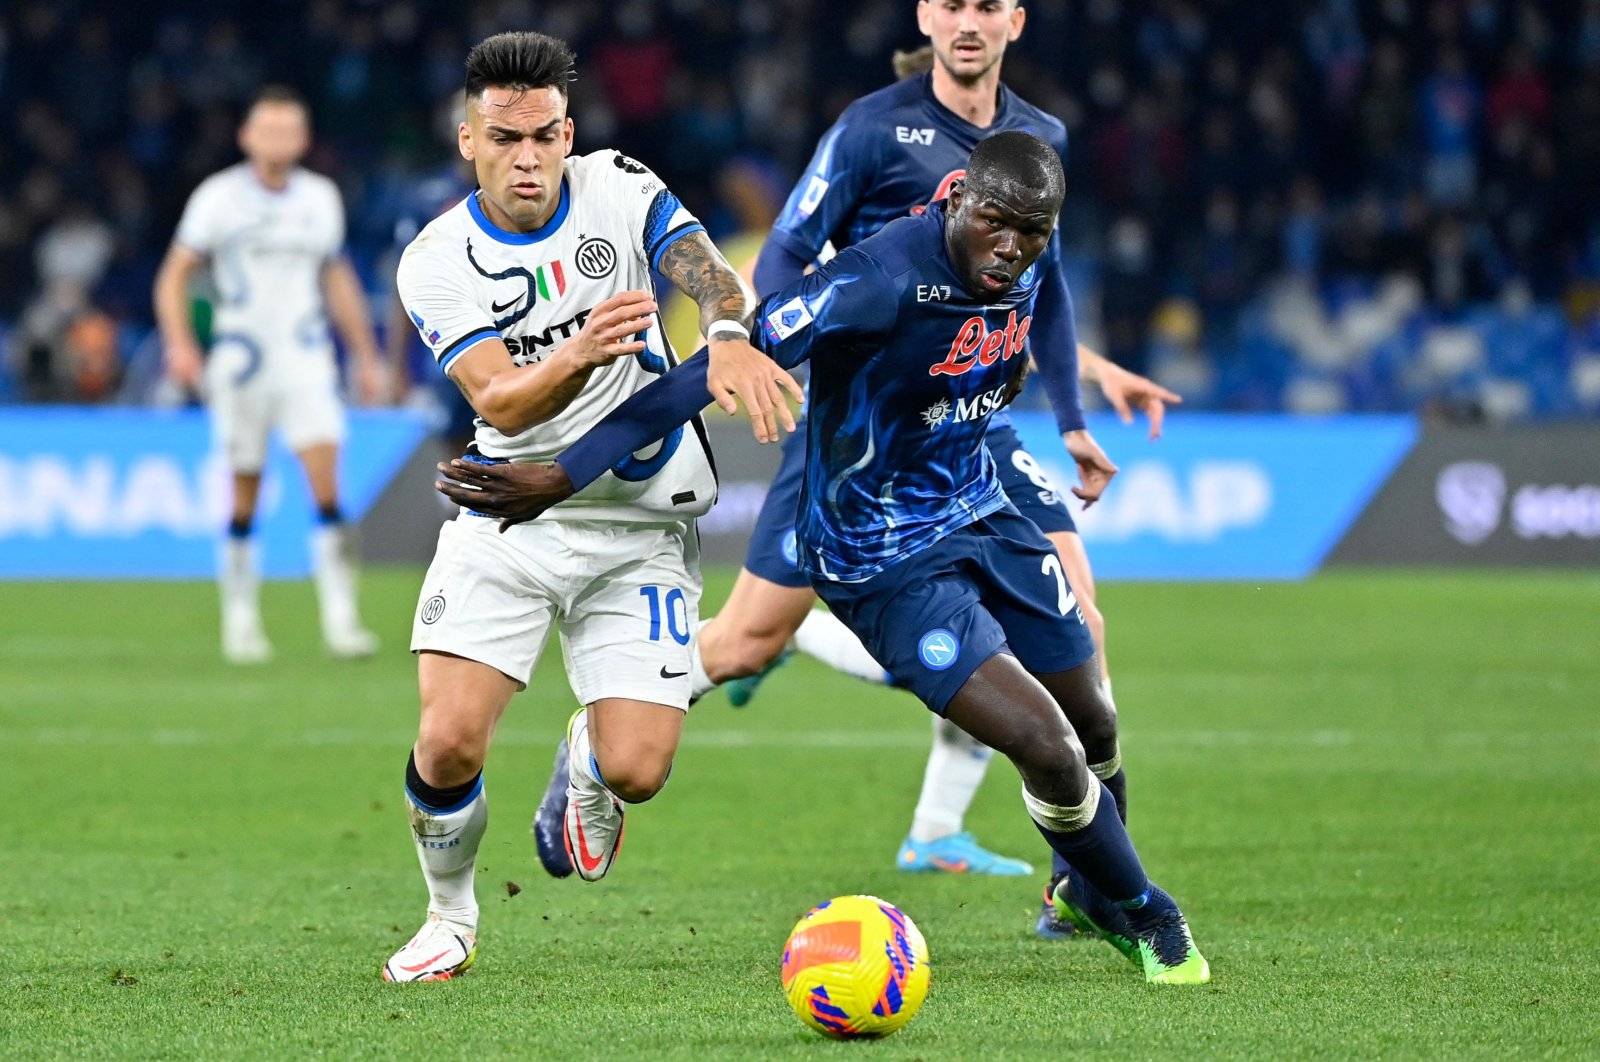 Inter Milan&#039;s Lautaro Martinez (L) vies for the ball against Napoli&#039;s Kalidou Koulibaly during a Serie A match, Naples, Italy, Feb. 12, 2022. (AFP Photo)